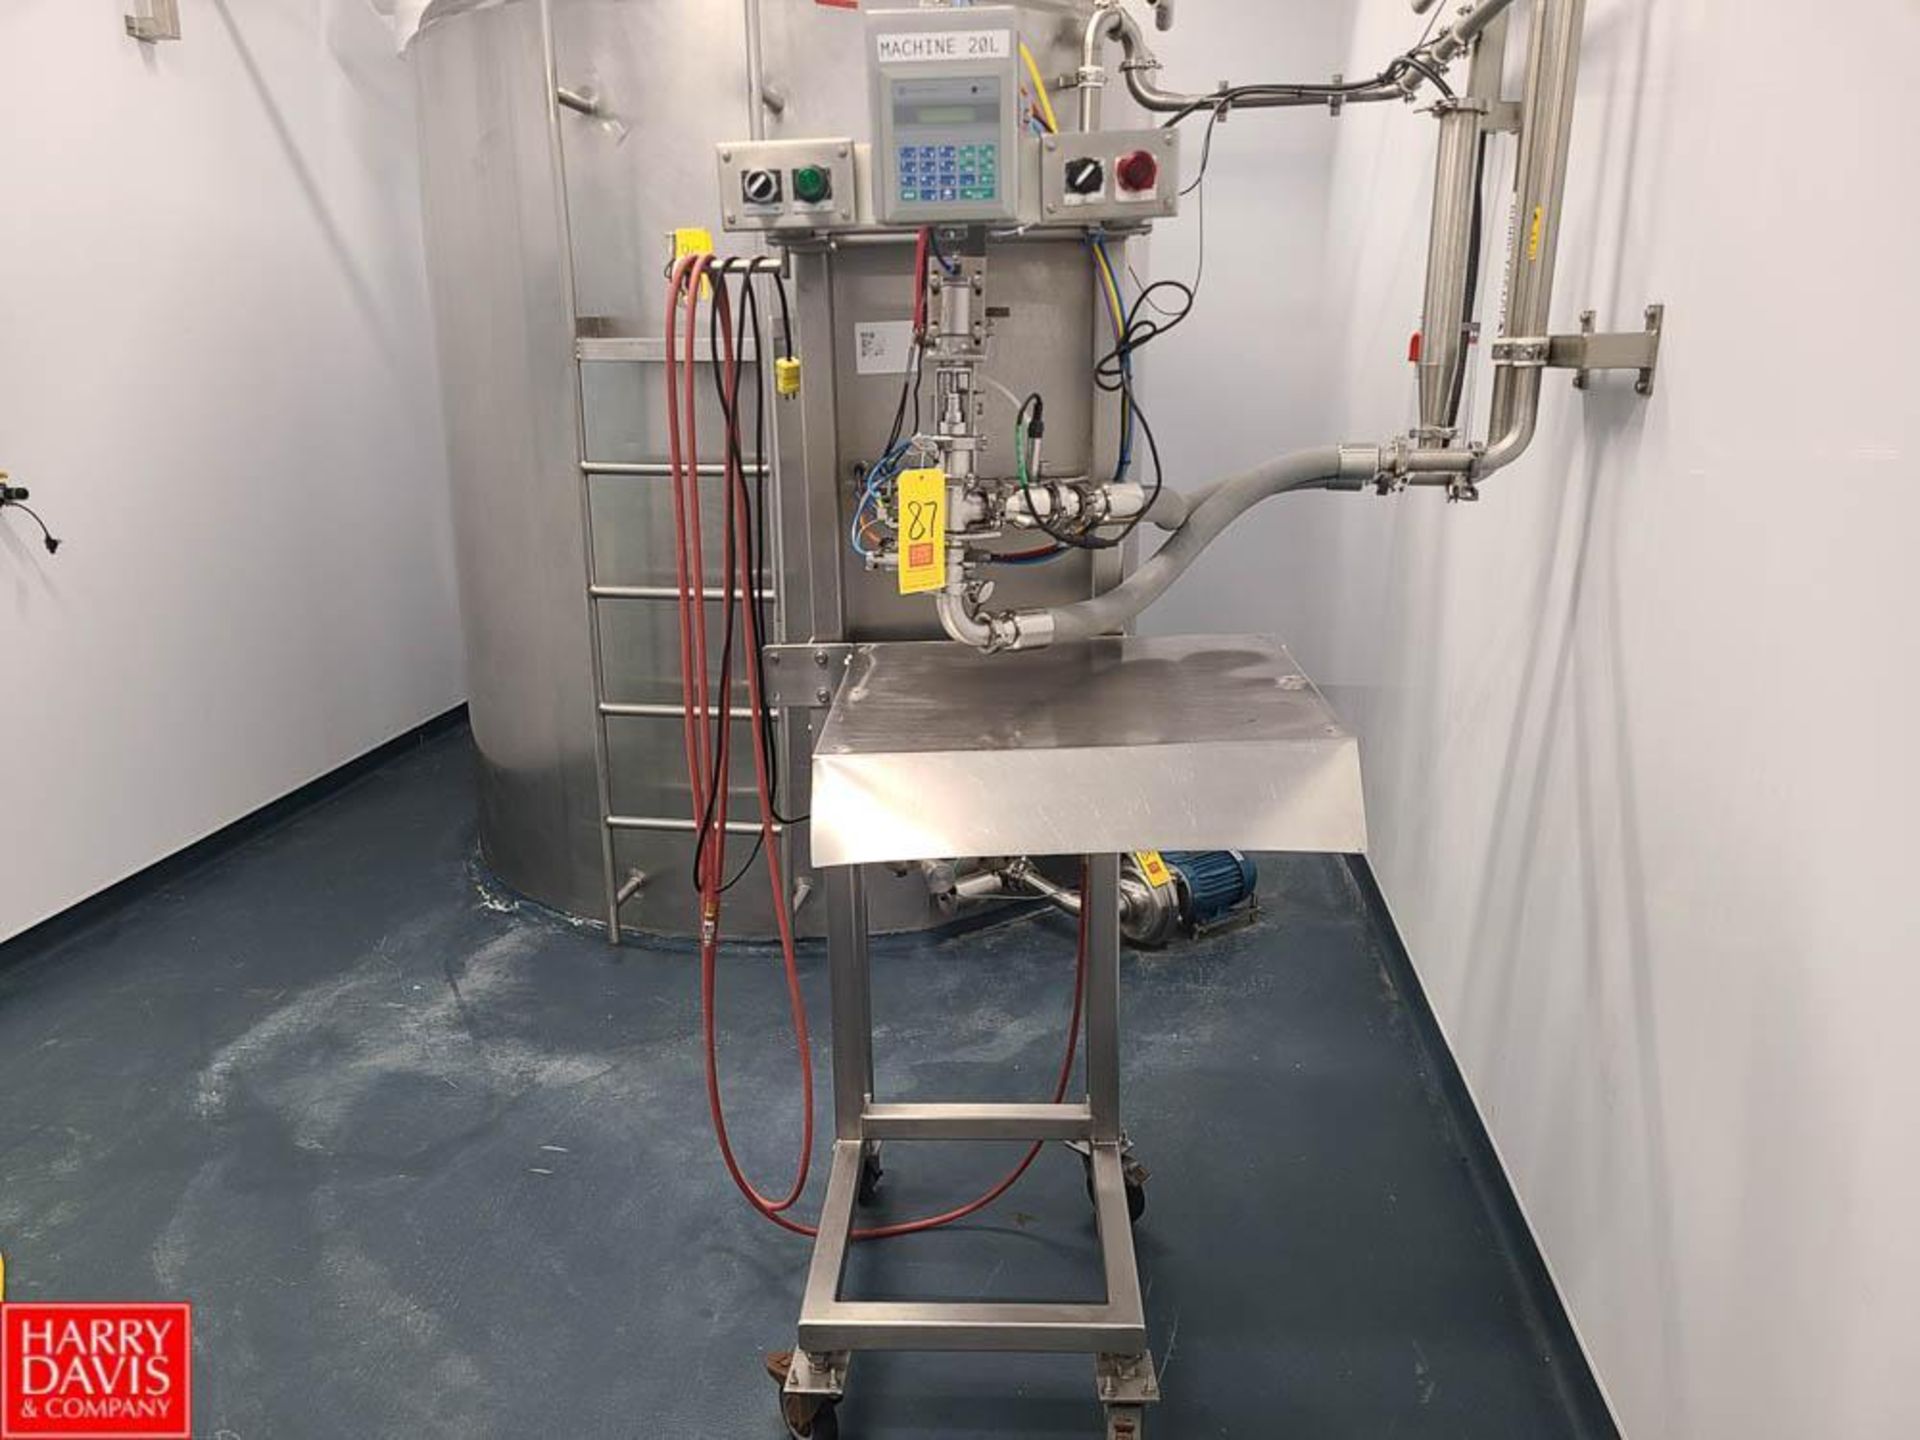 Scholle 5 Gallon (20 Liter) S/S Single Head Filler, Model: Auto-Fill 9D, S/N: 9D-223 with